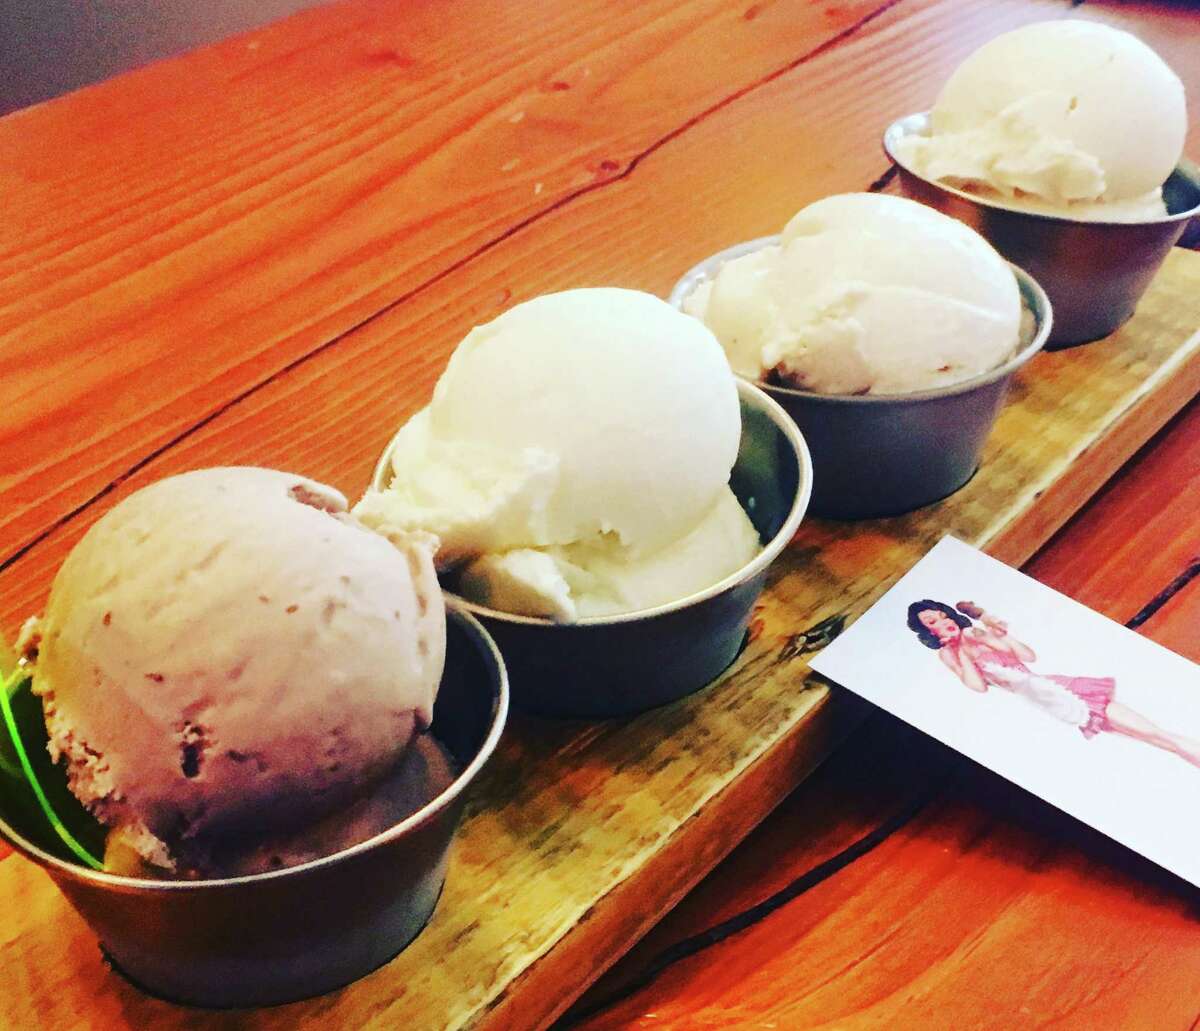 The House Boozy Ice Cream & Brews offers flights of booze-infused ice creams for $12. This lineup includes (from left to right): The Groom's Cake (Kahlúa), On the Rocks (tequila), French Toast (Fireball) and Bourbon Vanilla (Jim Beam Honey).